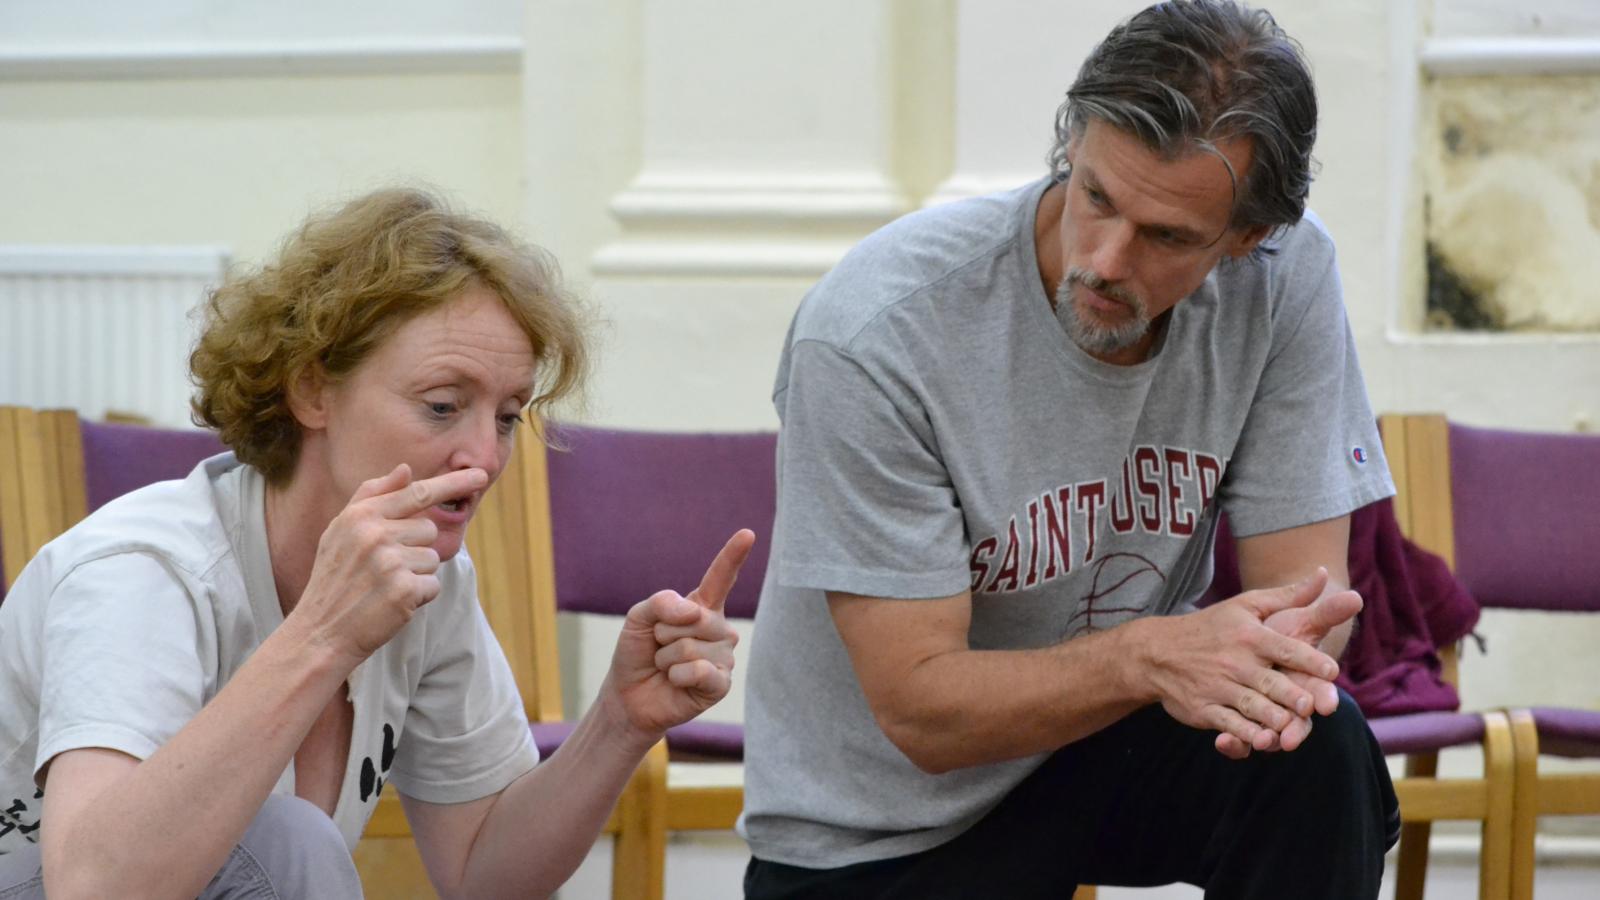 The Tempest Director Kelly Hunter (Royal Shakespeare Company) and Ohio State Assistant Professor Kevin McClatchy discussing a scene during rehearsal. June, 2014, The RSC Rehearsal room in London, England.